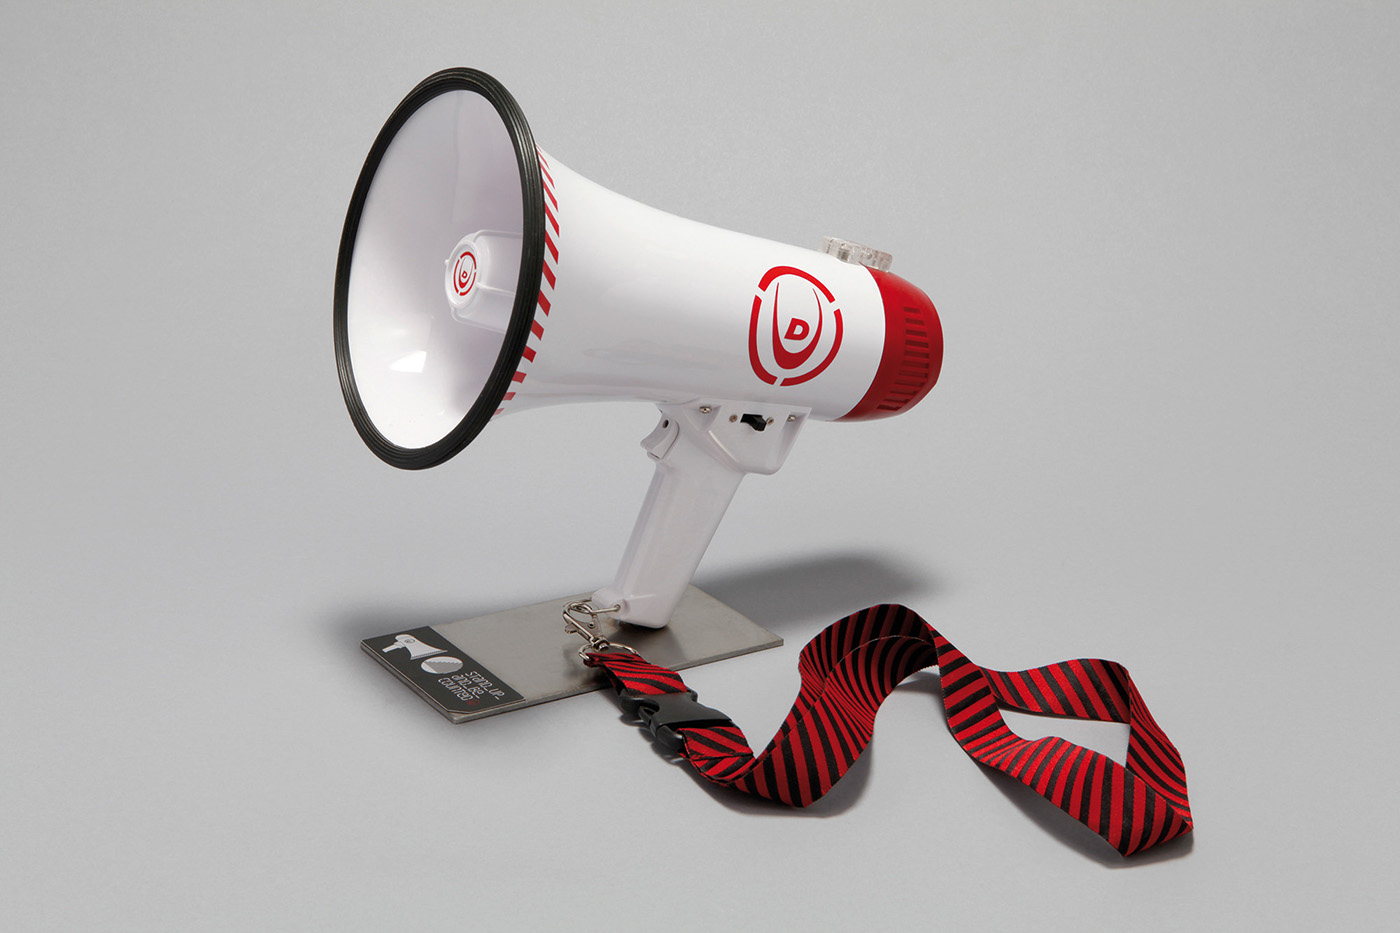 Duck and Cover DAC Popint of Sale pos design friendship Megaphone in store